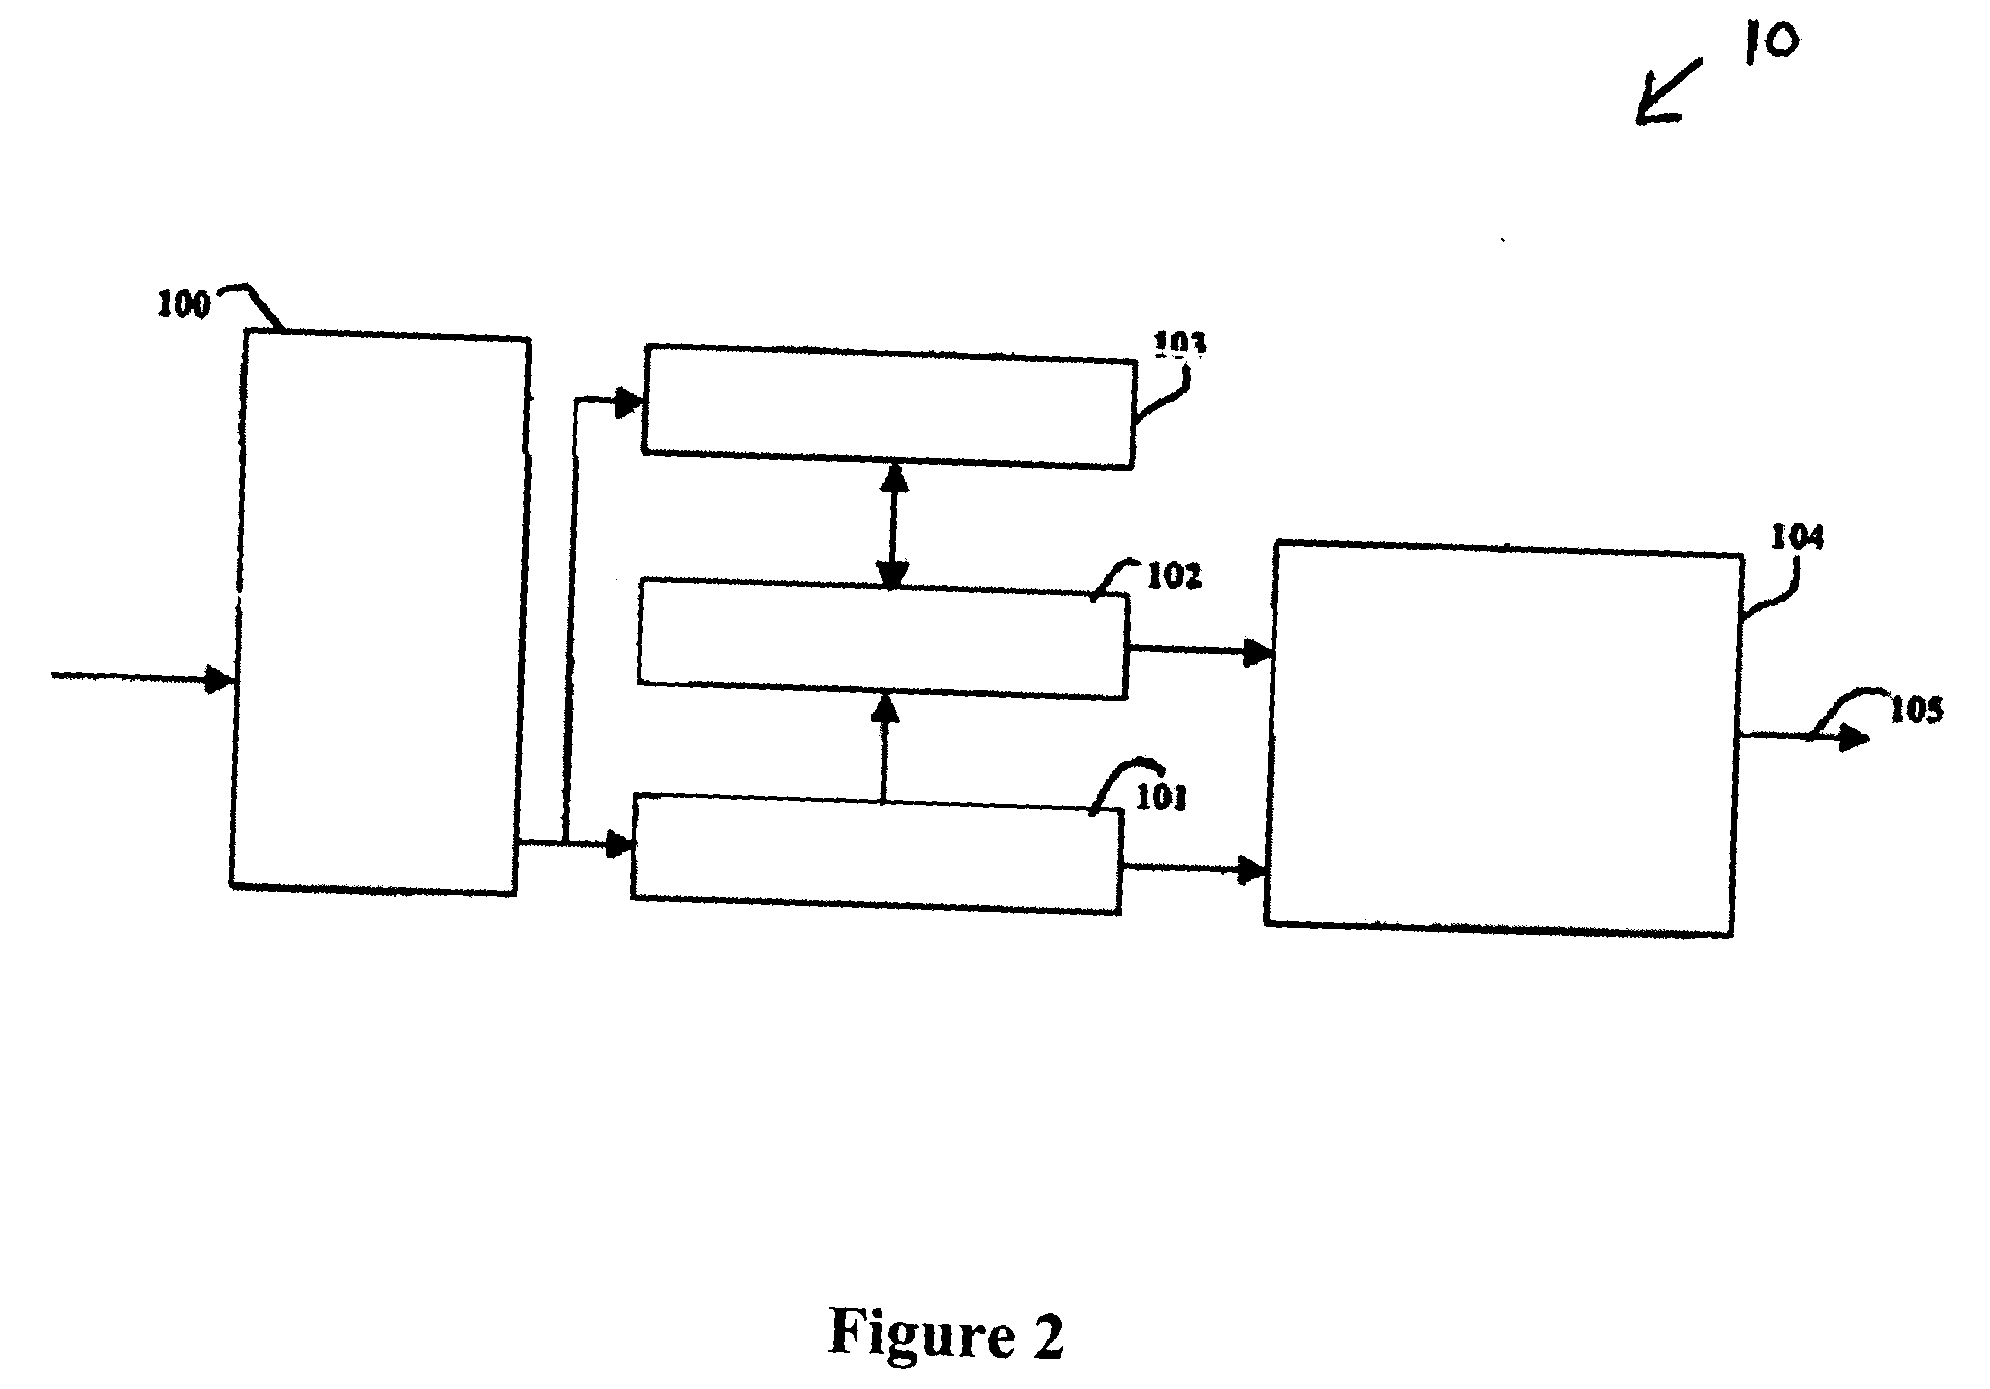 Apparatus, methods and articles of manufacture for signal correction using adaptive phase re-alignment